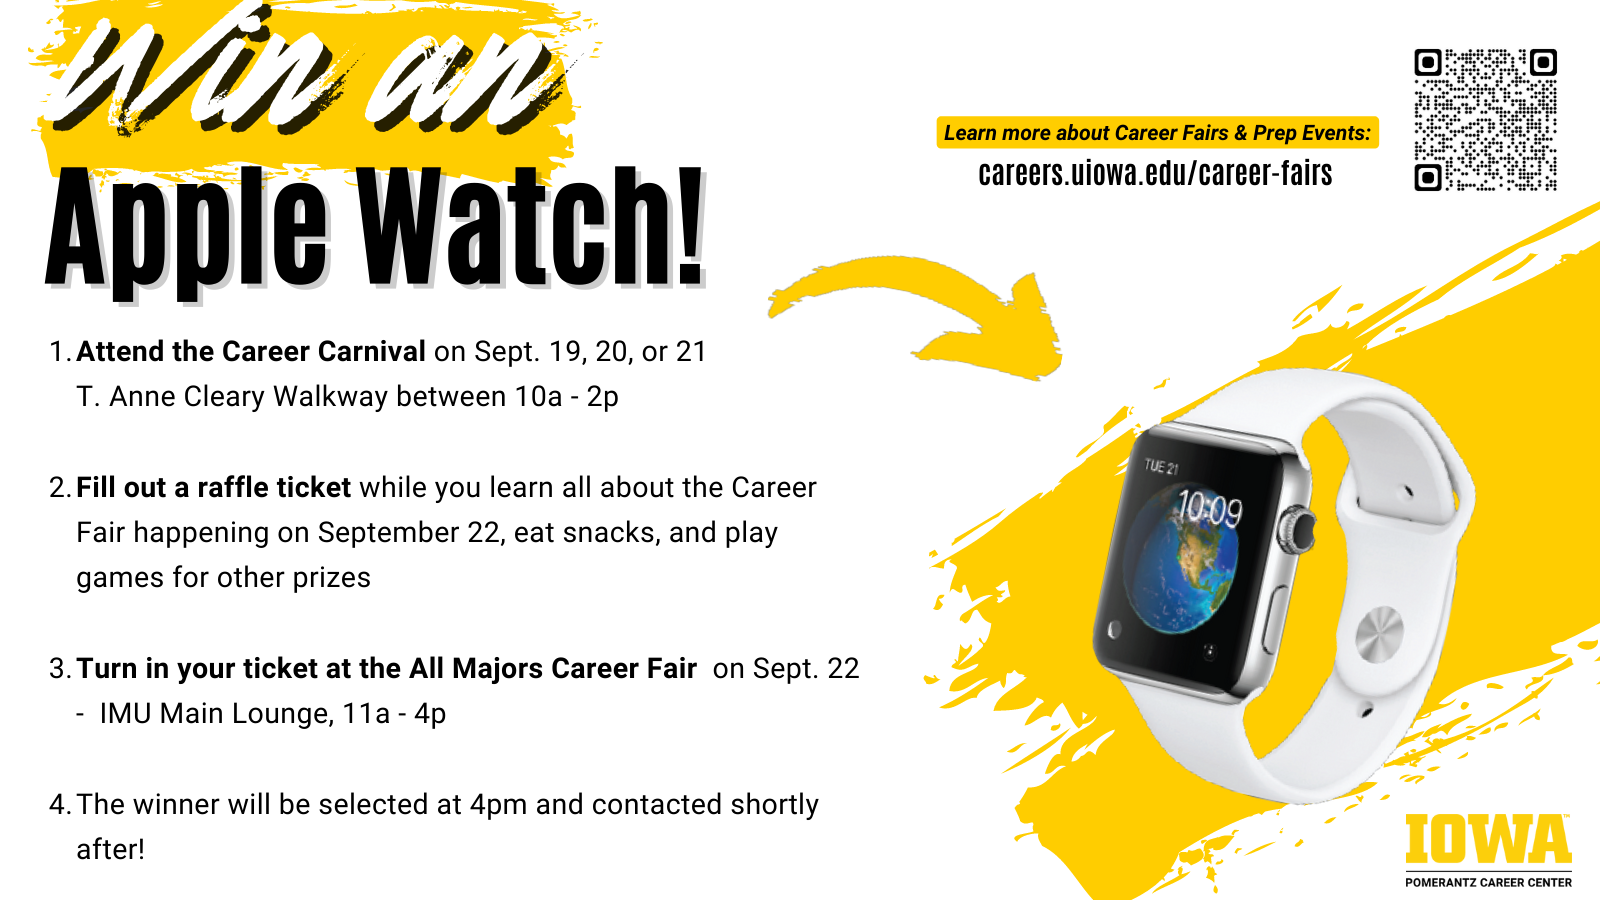 Win an apple watch at the career carnival!